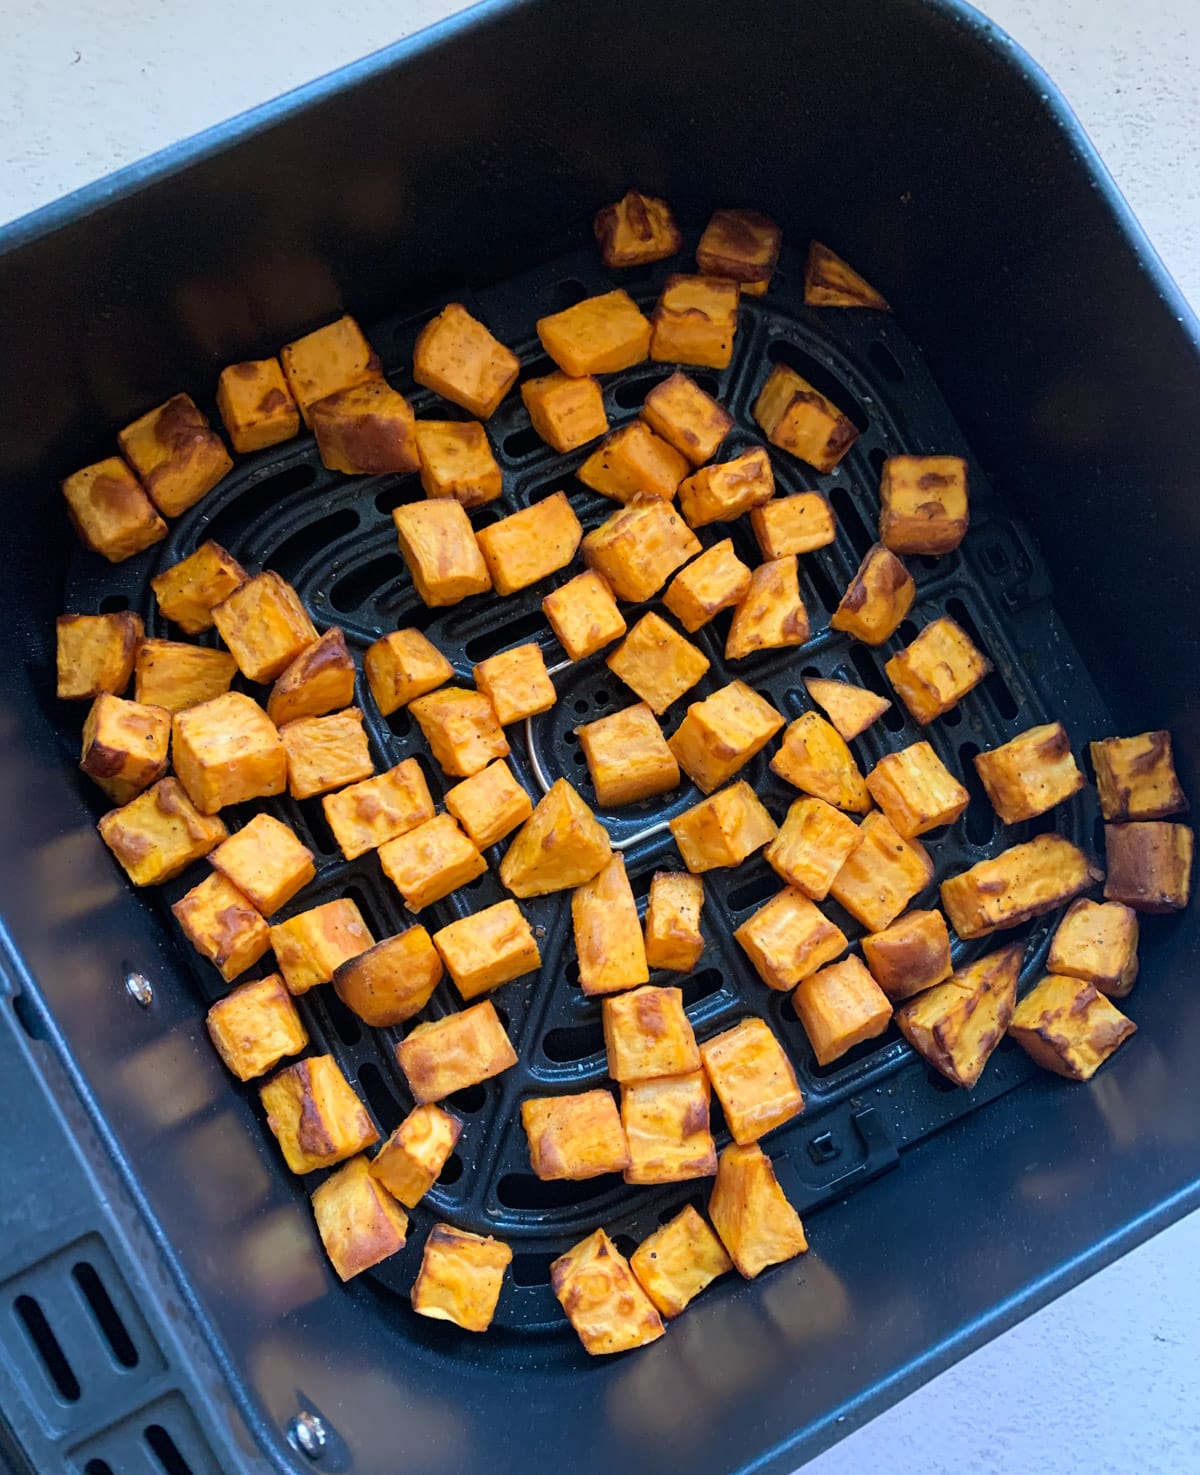 Roasted sweet potato in the air fryer